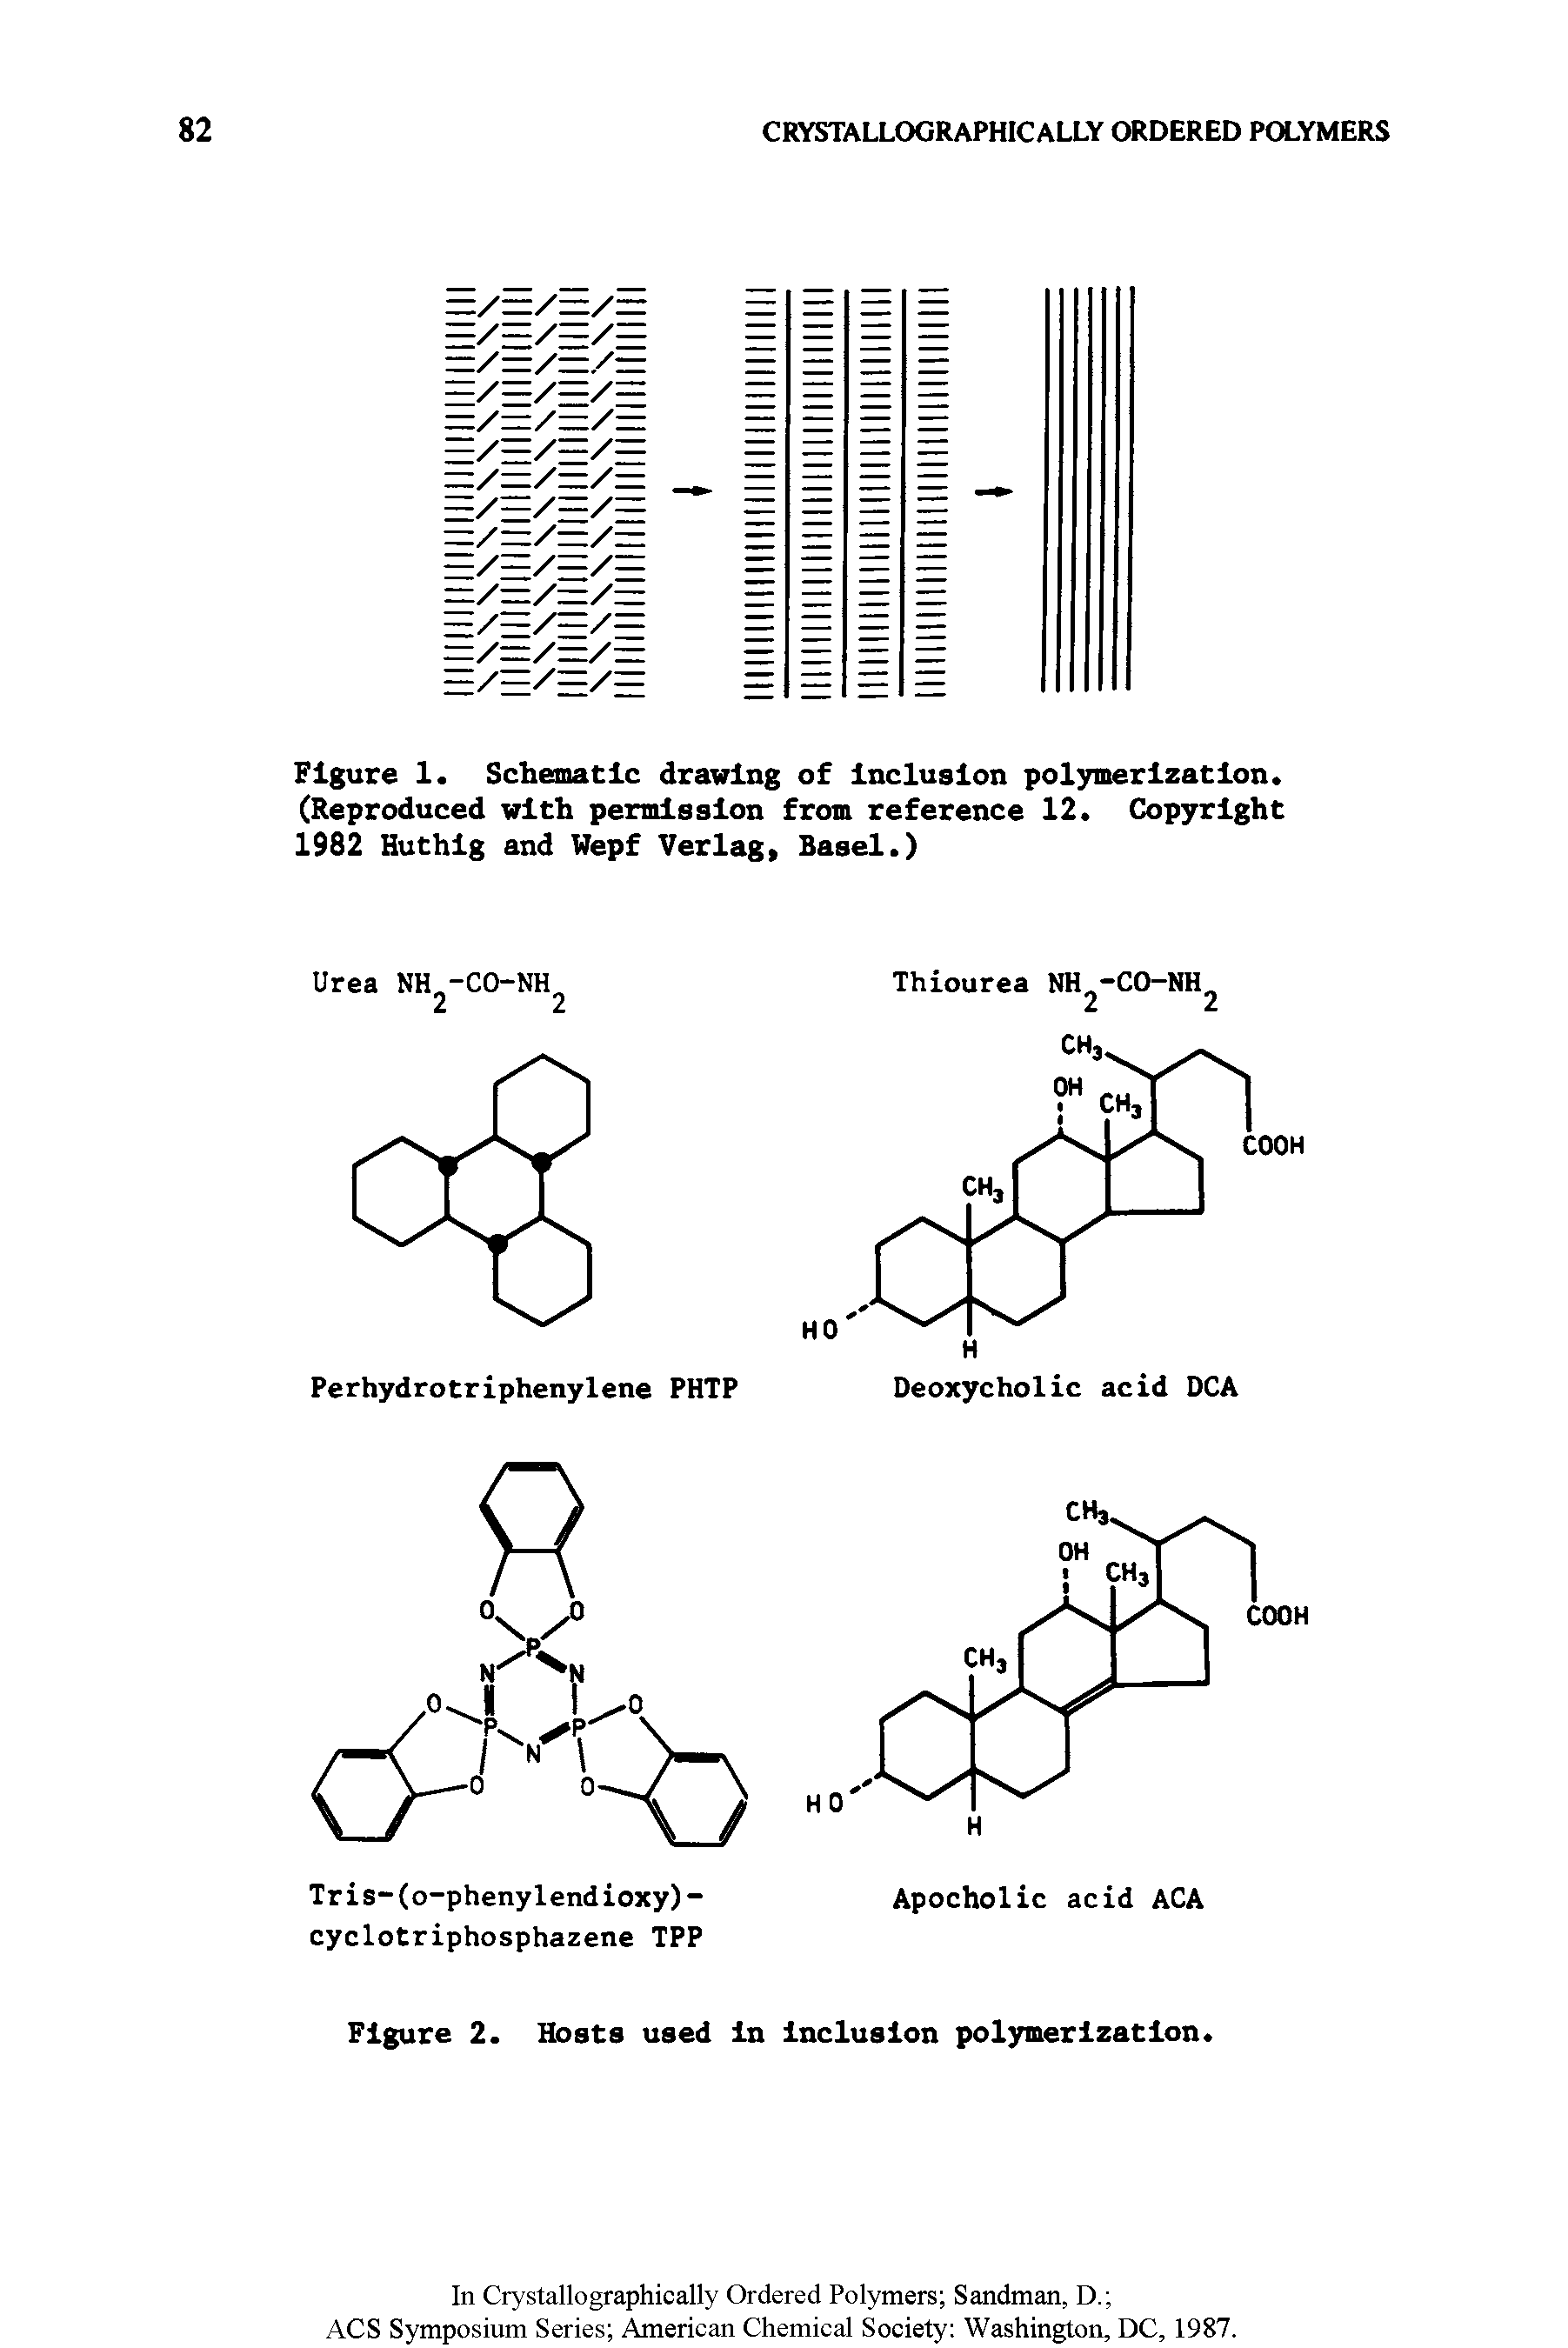 Figure 1. Schematic drawing of Inclusion polymerization. (Reproduced with permission from reference 12. Copyright 1982 Huthlg and Wepf Verlag, Basel.)...